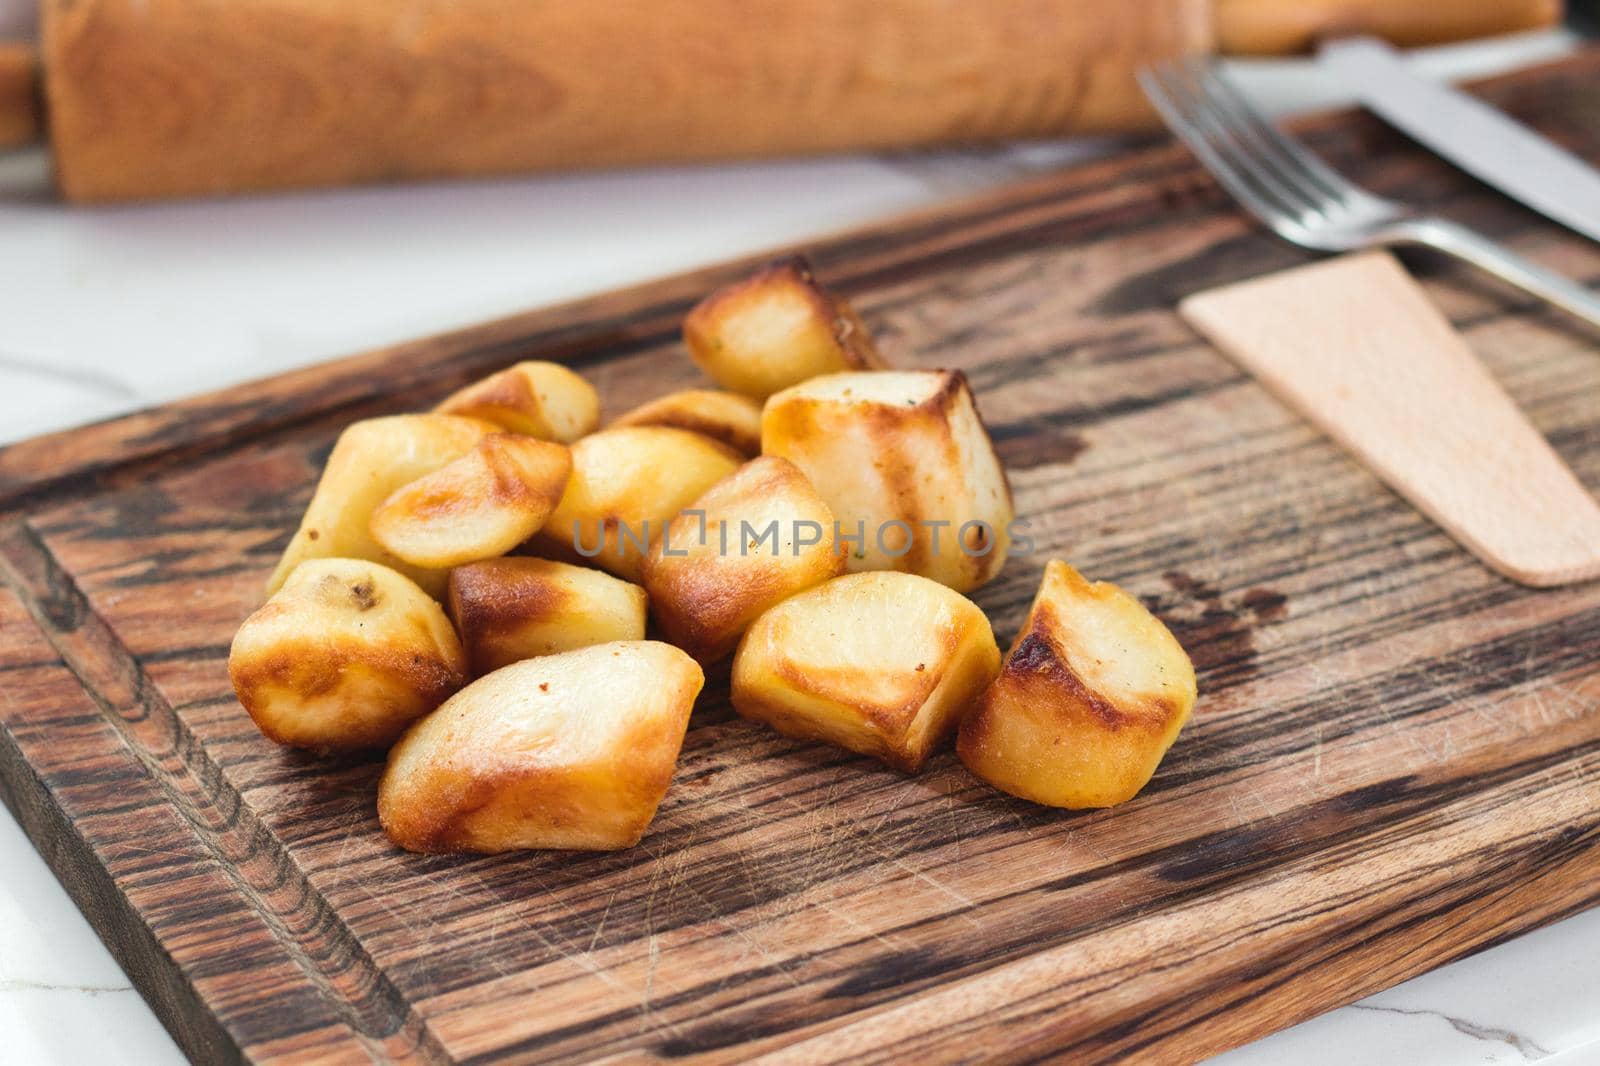 Roasted potatoes on a wooden chopping board on a kitchen worktop